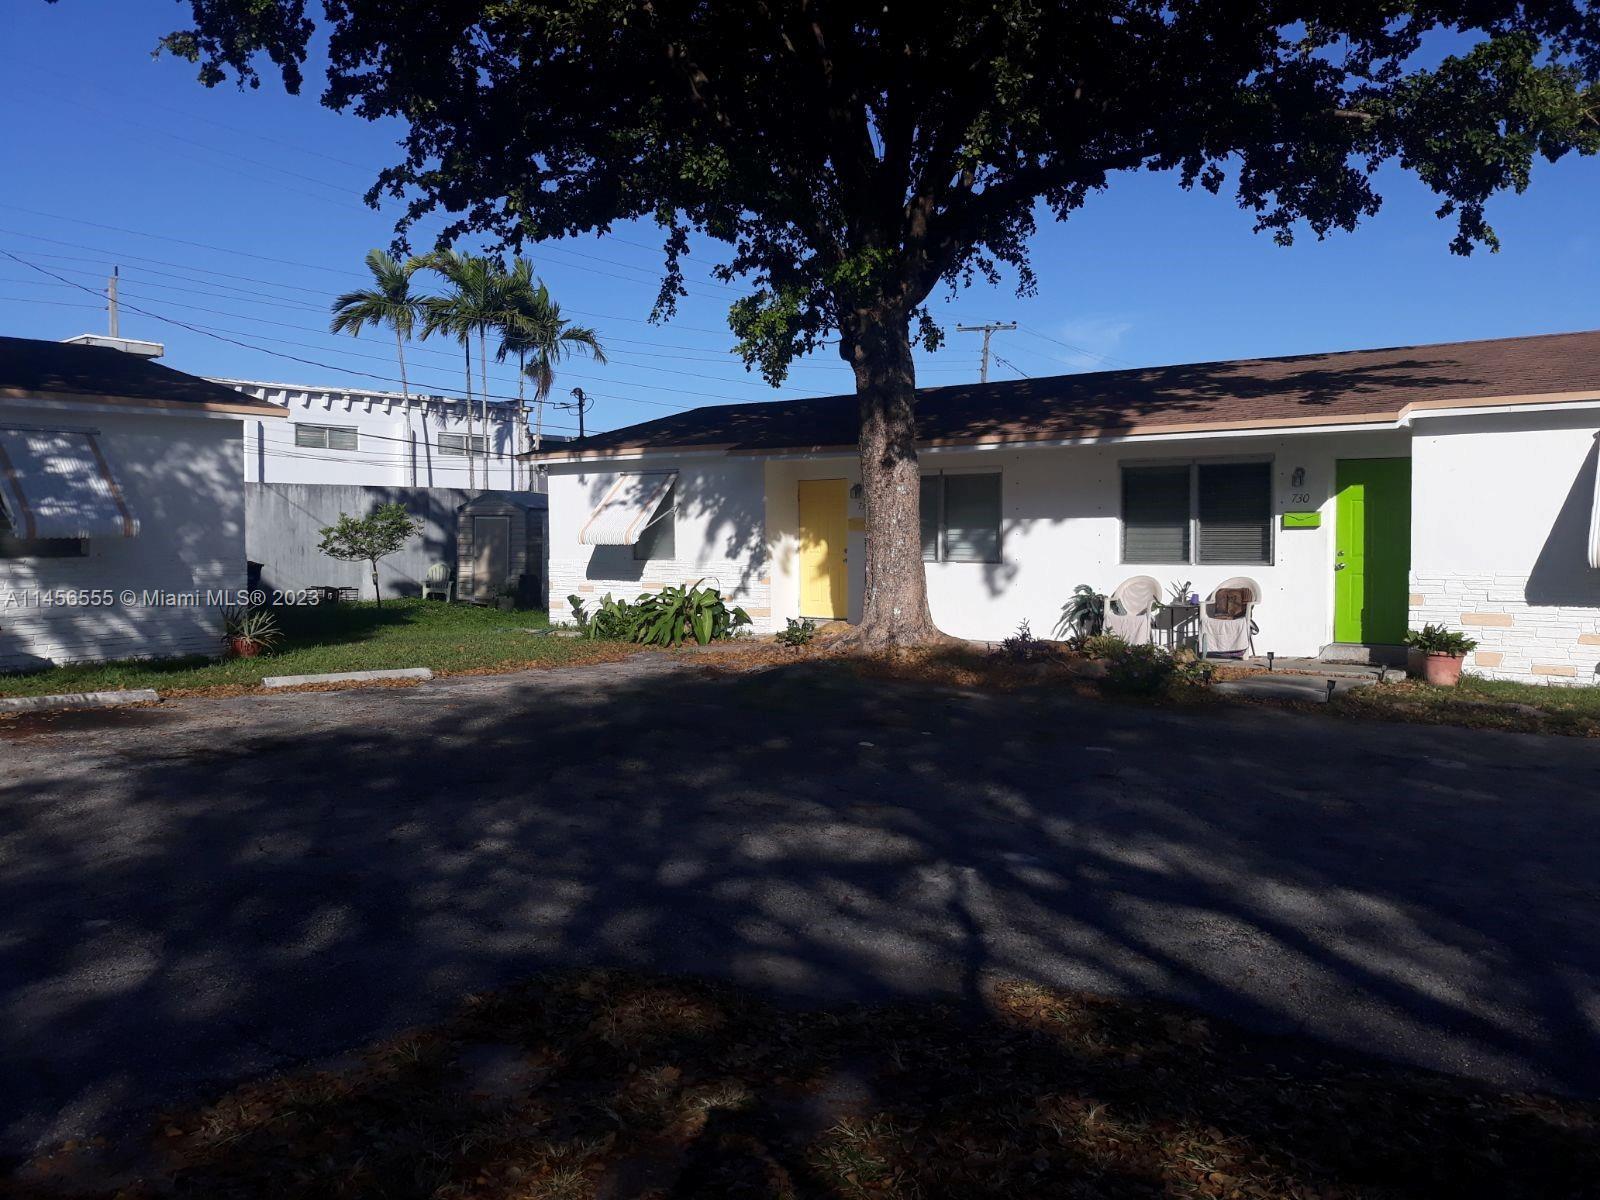 Amazing income producing duplex in highly desired Hallandale area, East of I-95. Long-time, stable, 